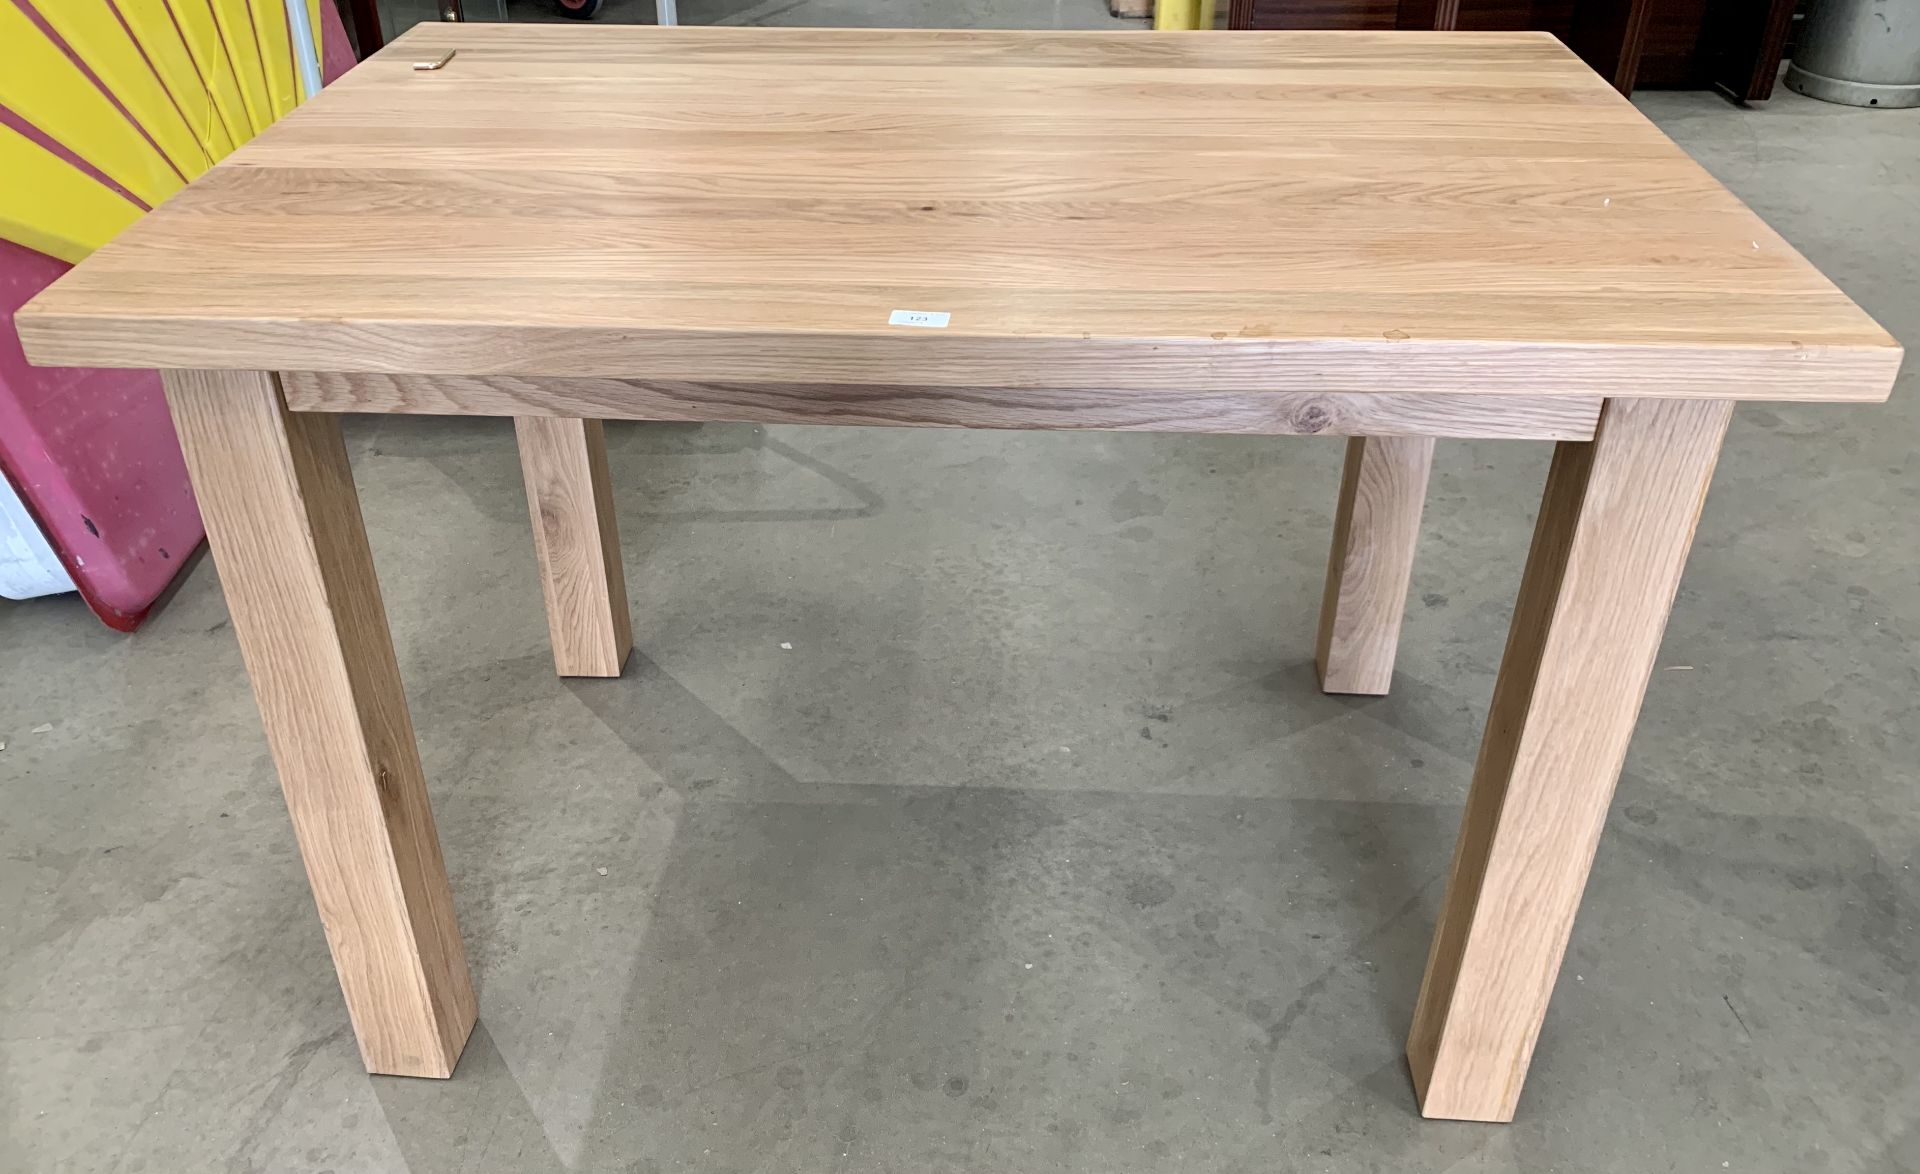 Solid oak natural coloured dining table - 120cm x 80cm x 77.